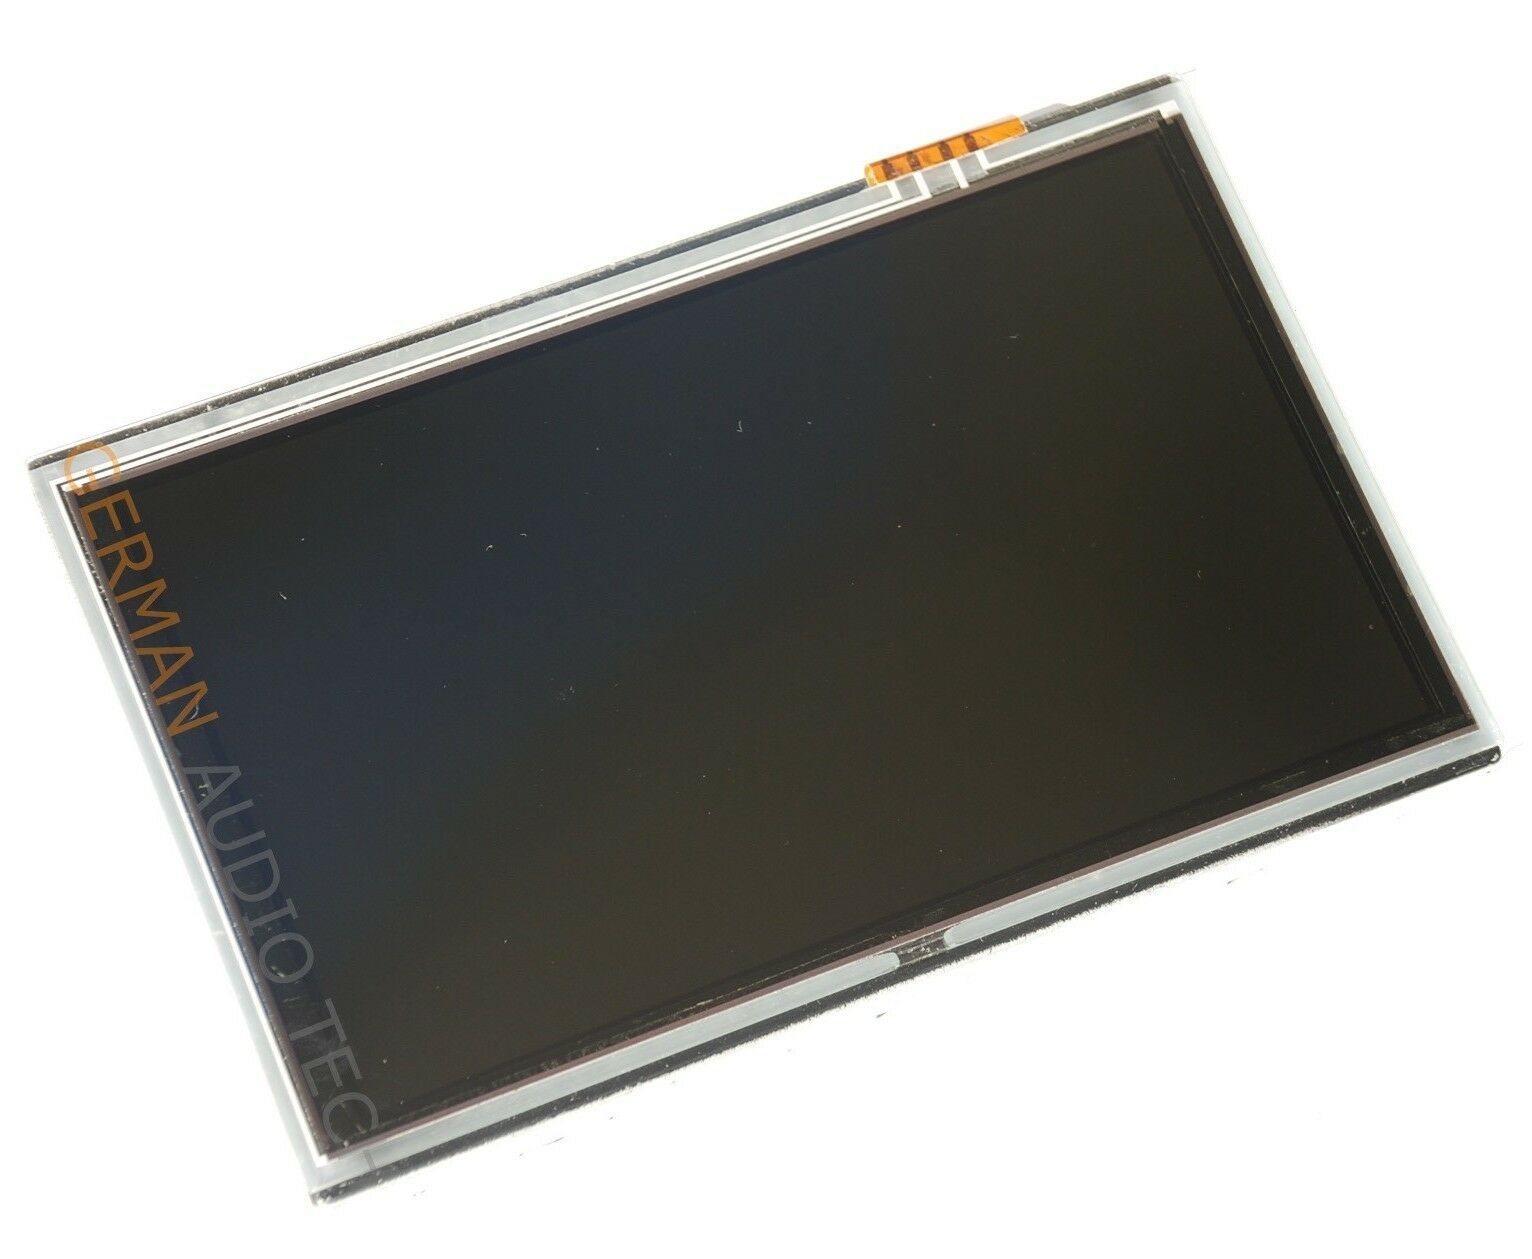 Primary image for LEXUS GS350 GS430 GS450H NAVIGATION LCD DISPLAY+TOUCH SCREEN 2006 2007 2008 2009